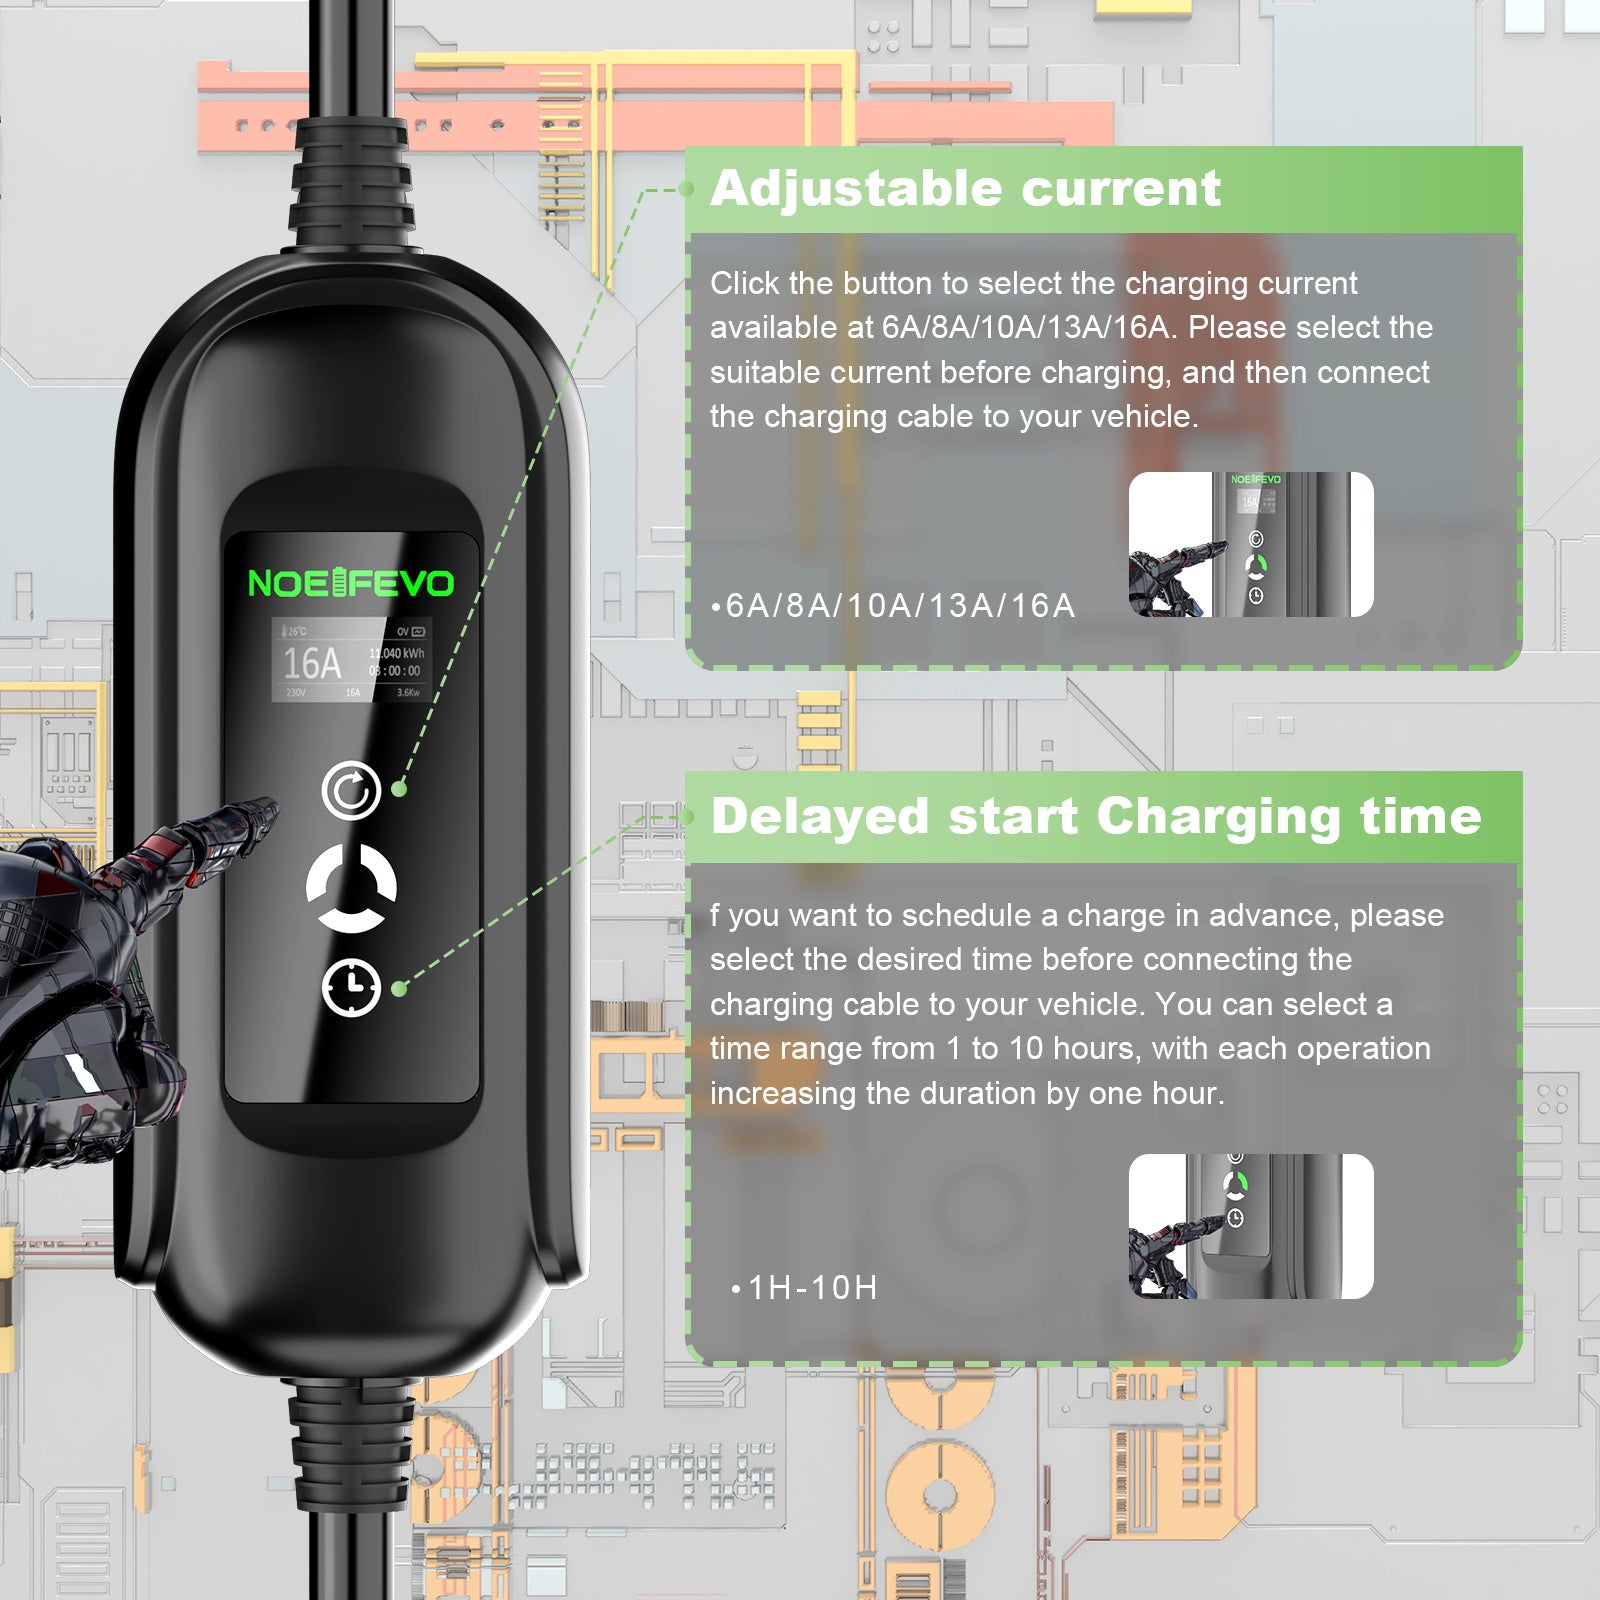 Noeifevo Power Fast Charging Cable 11kW 16A Type 2 to CEE EV